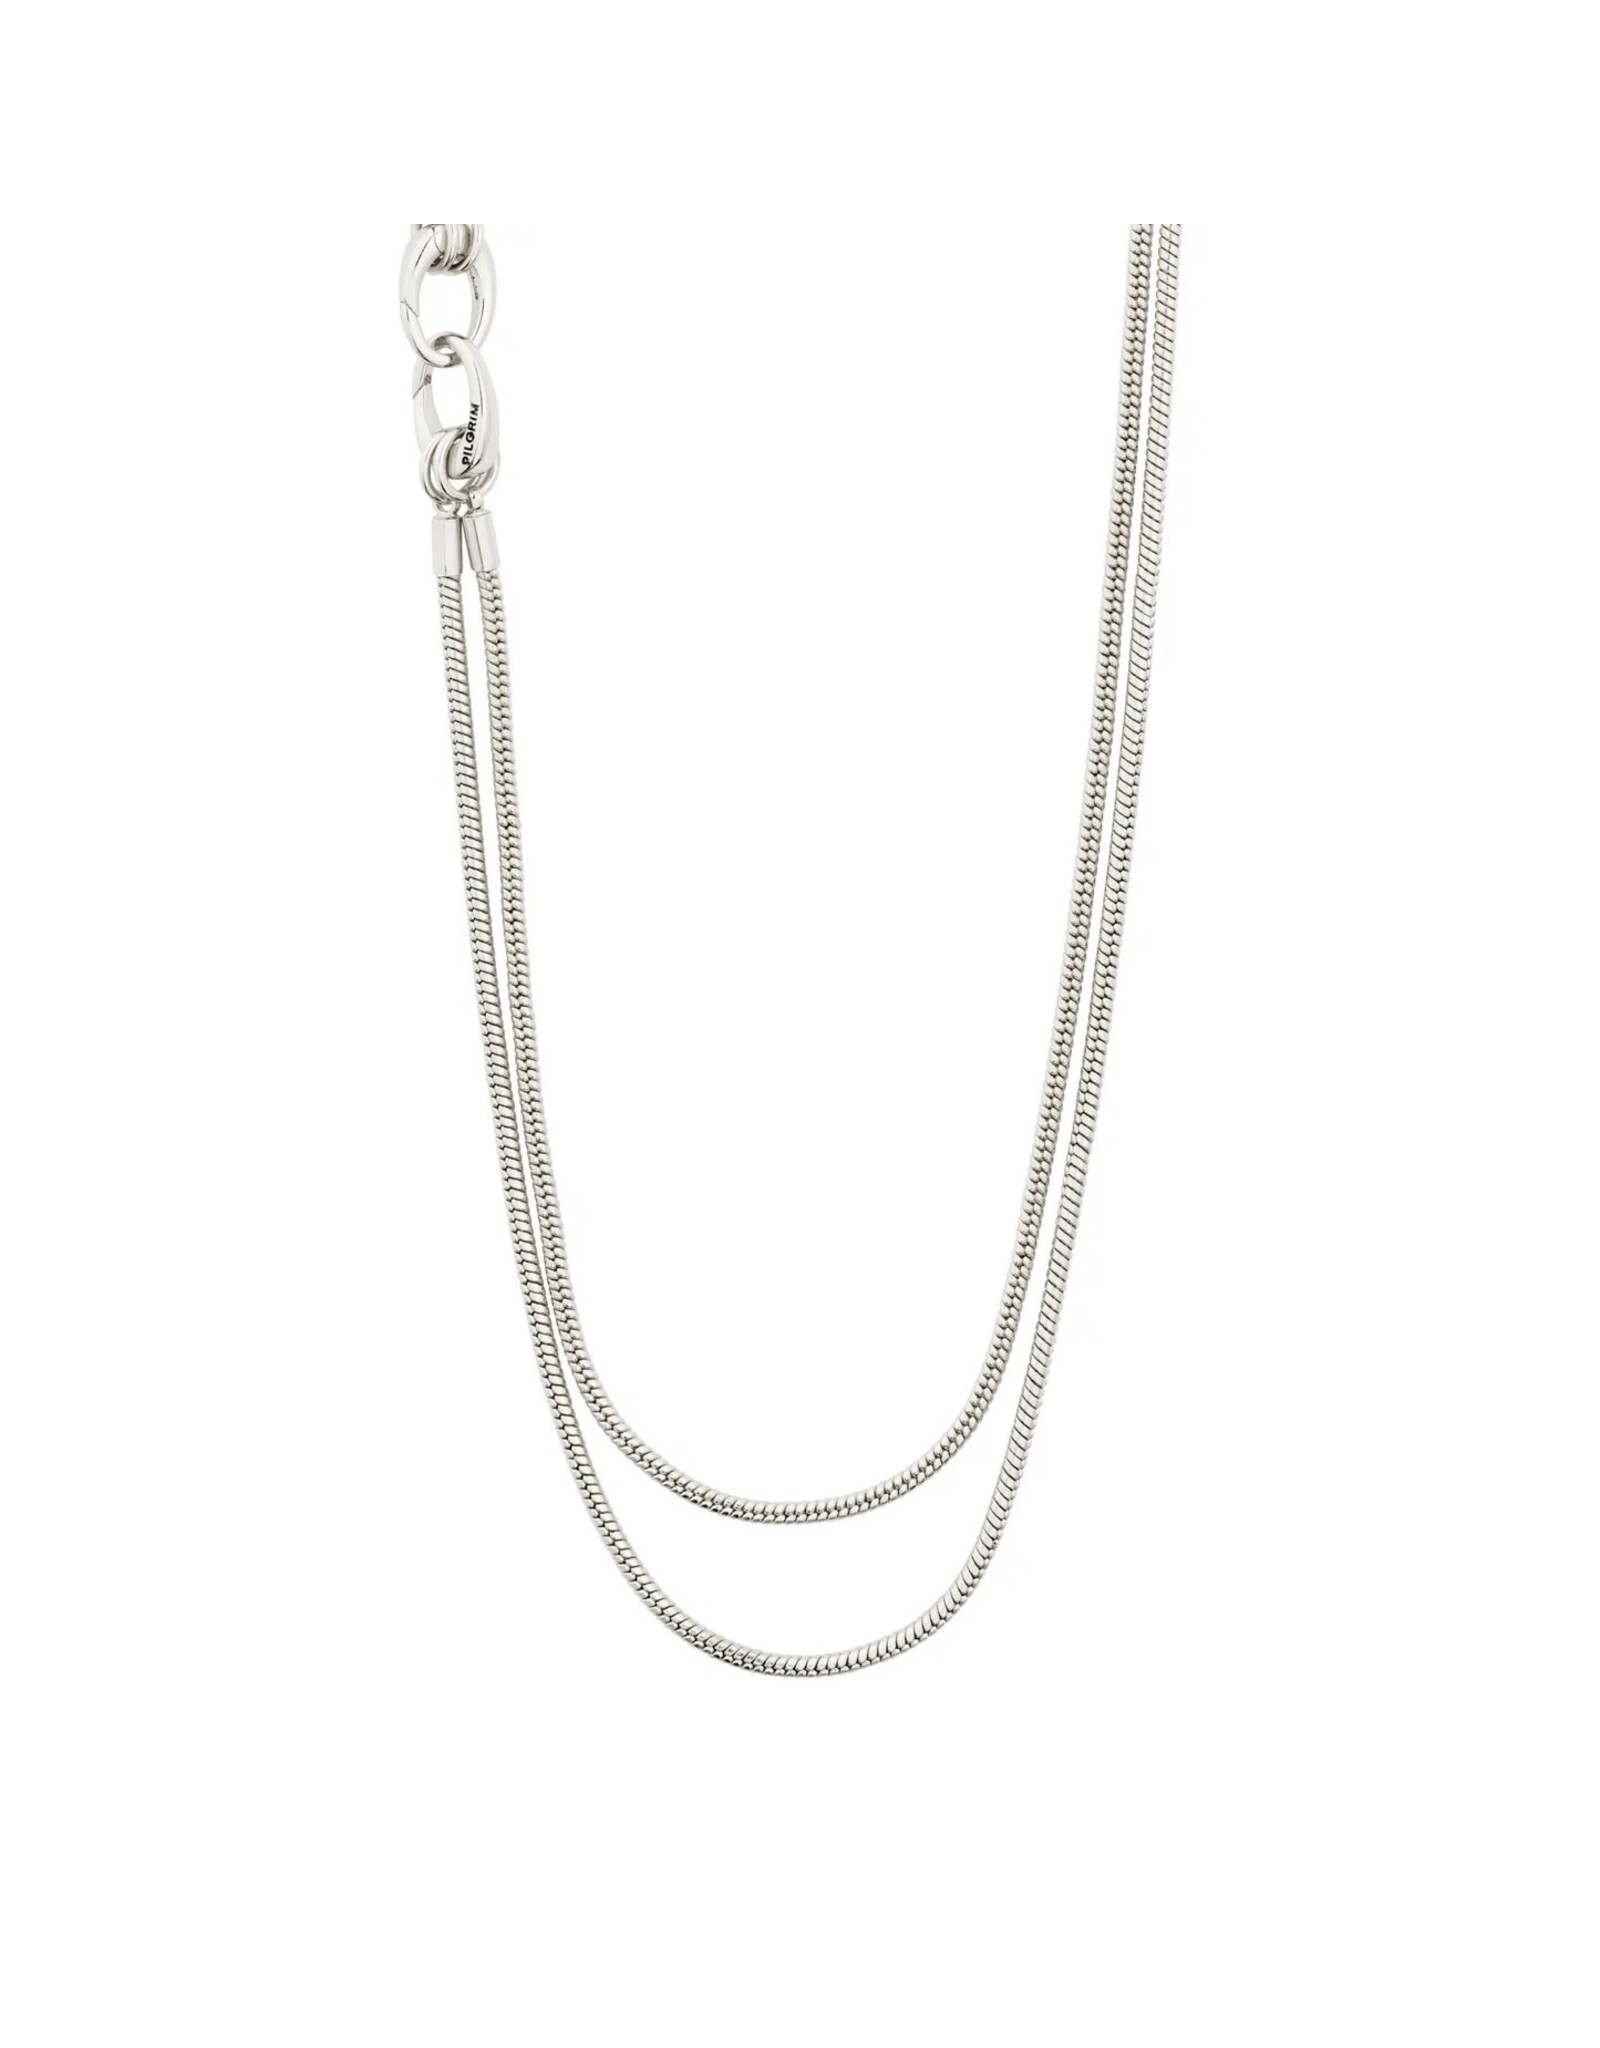 BGS Pilgrim - Solidarity Recycled Snake Chain Necklace / Silver